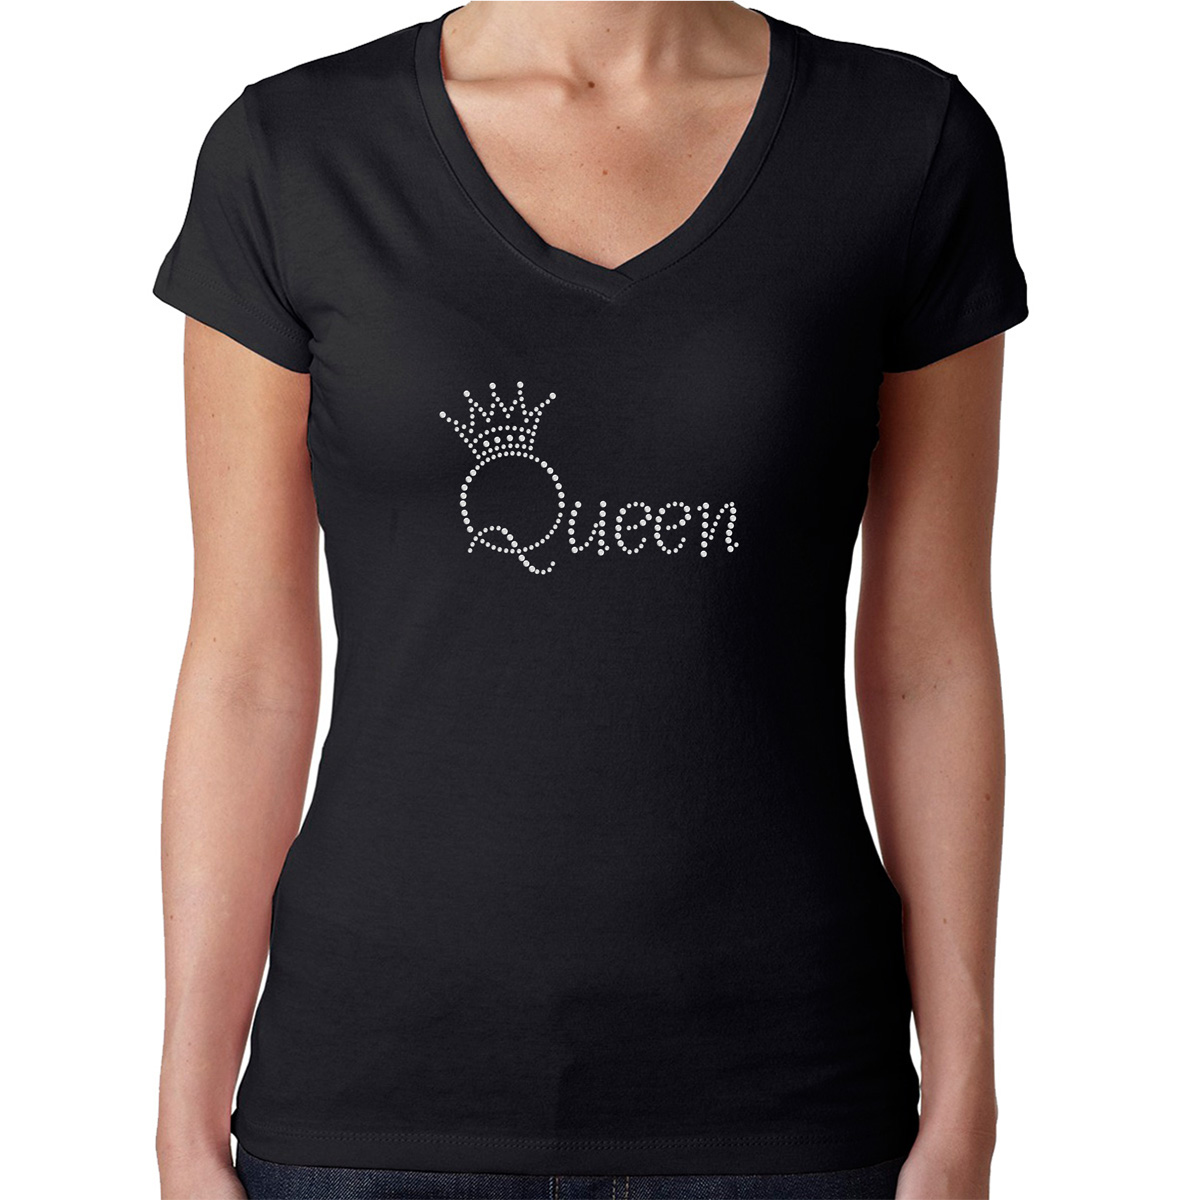 Womens T-Shirt Rhinestone Bling Black Tee Queen Crown Crystal White V-Neck X-Large - image 1 of 2